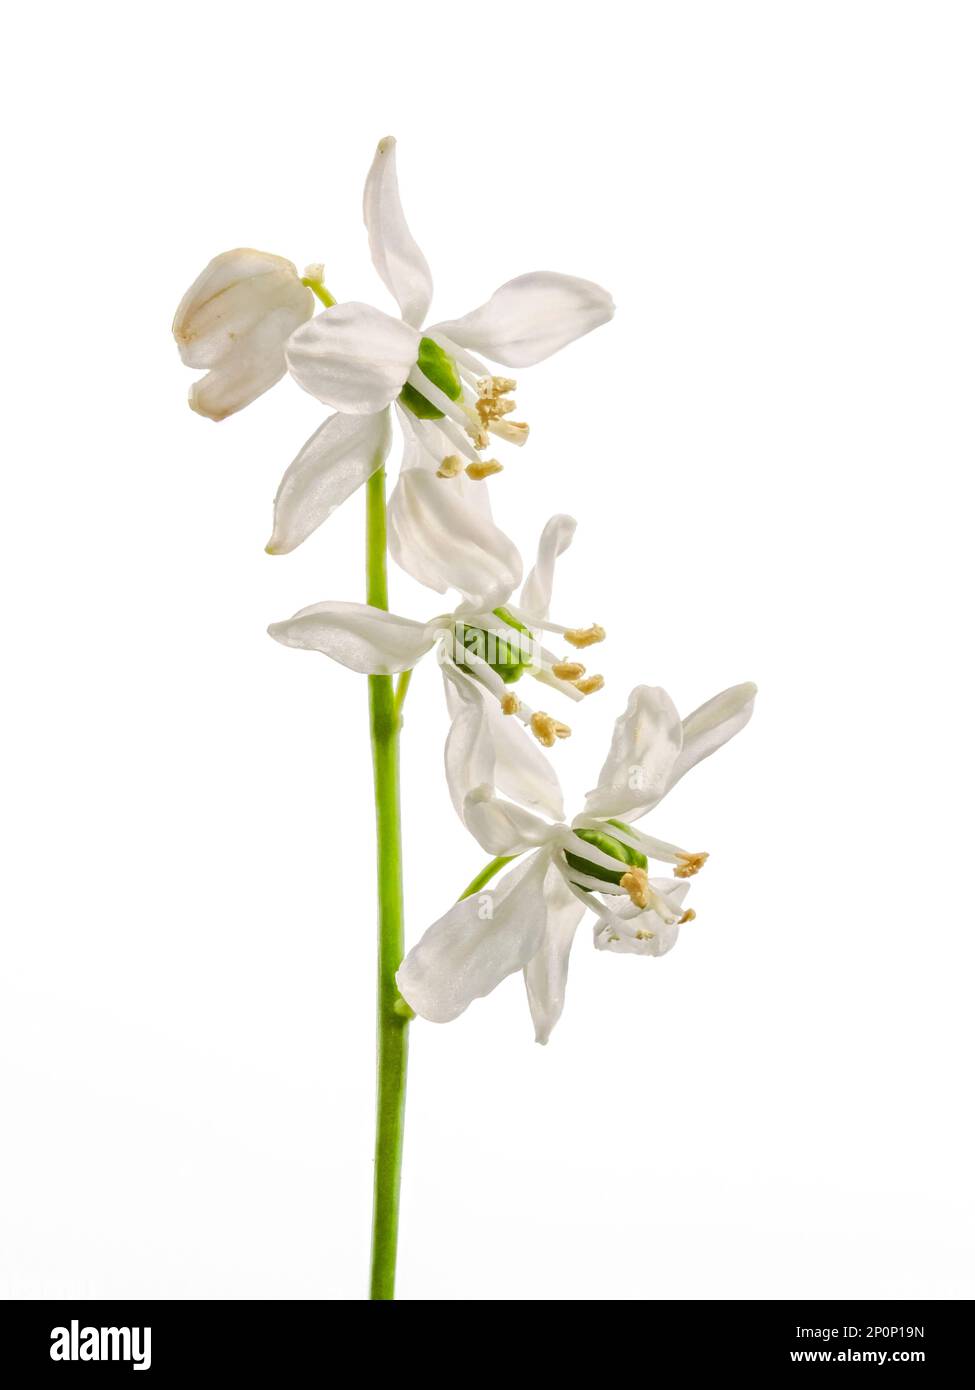 Three Snowdrop flowers, (Galanthus nivalis), on a single stem, photographed against a white background Stock Photo